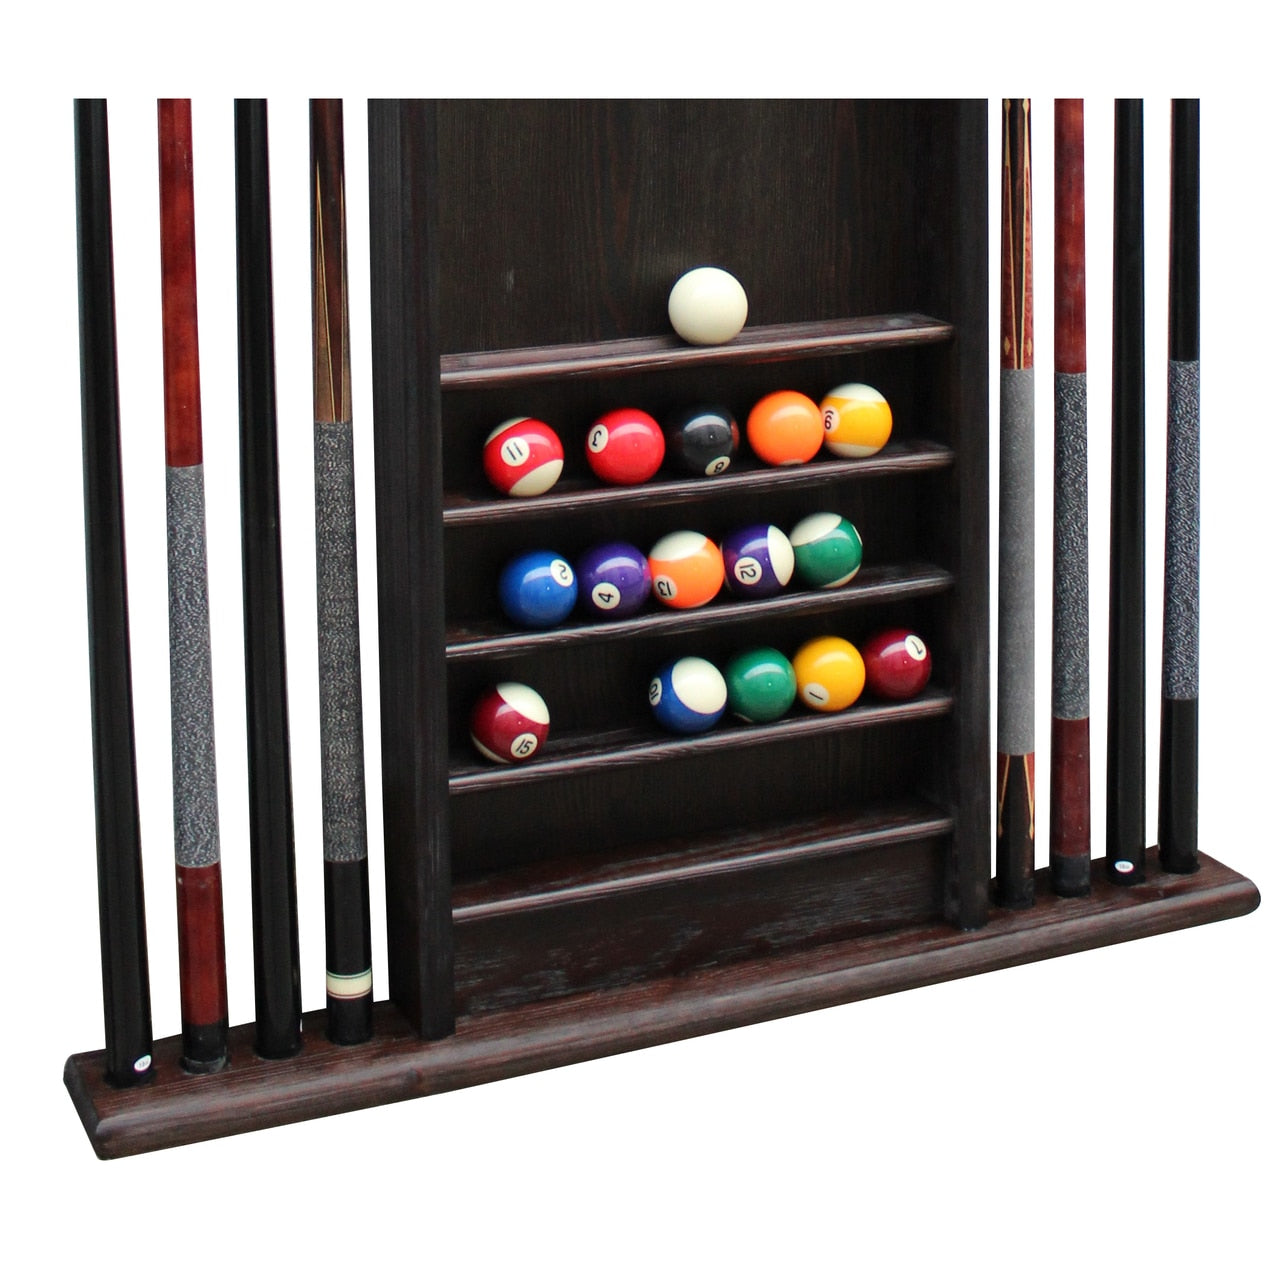 Wall Mounted Weathered Gray Wood Pool Cue Rack, Billiards Accessories Holder and Ball Storage Shelf Set